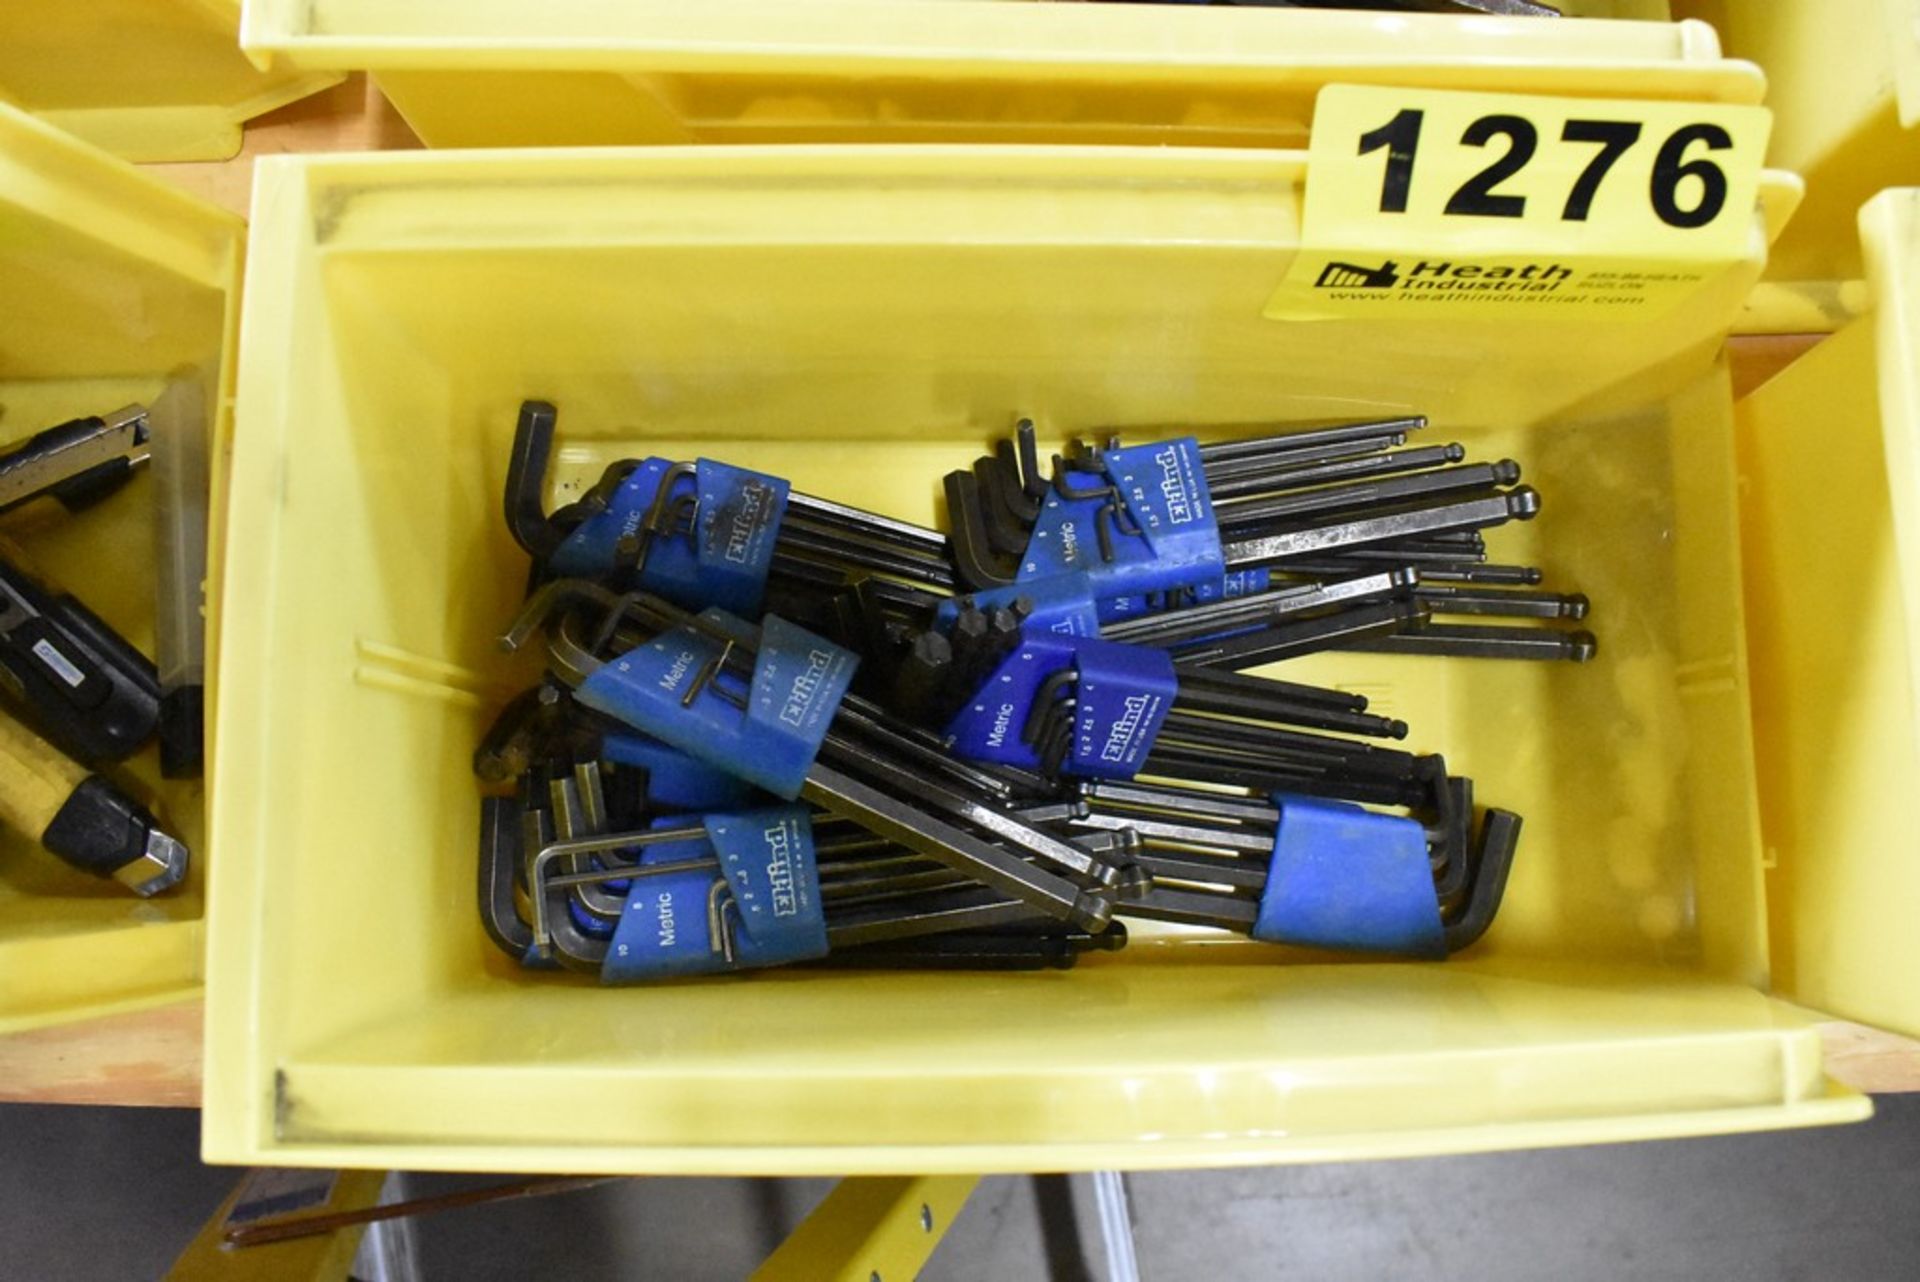 LARGE QTY OF ALLEN WRENCHES